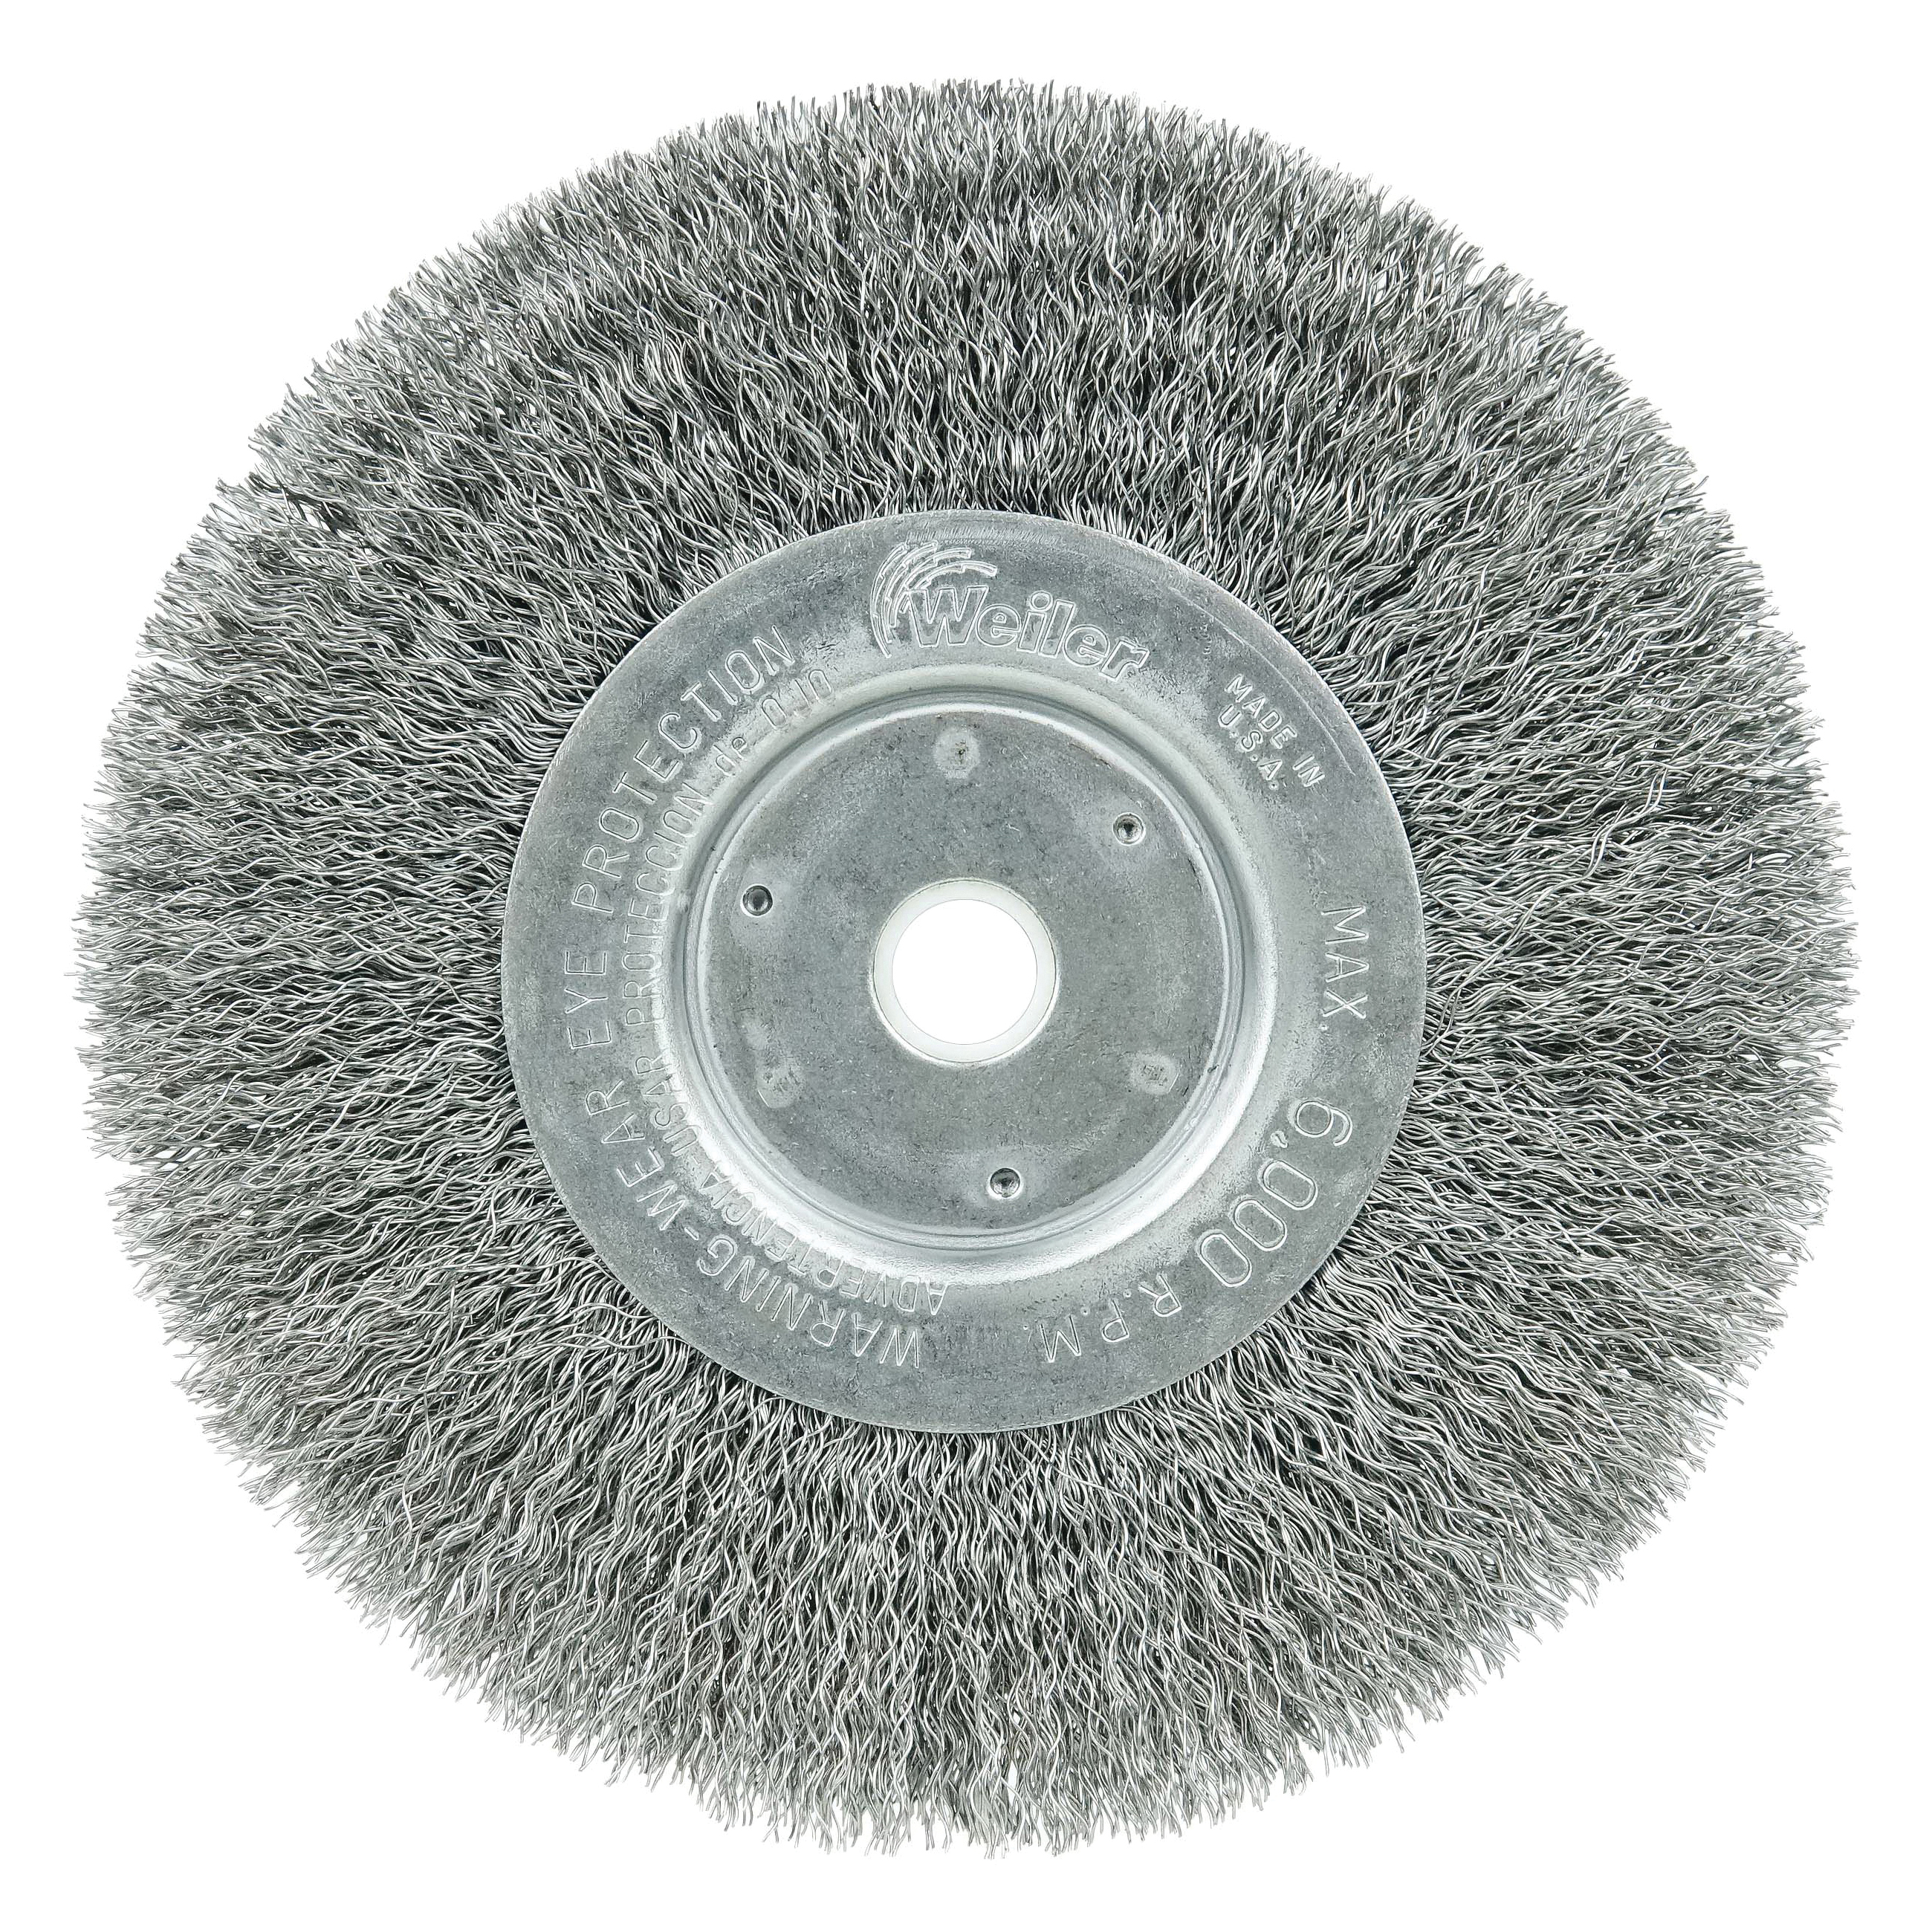 Weiler® 00214 TLN-3 Narrow Face Wheel Brush, 3 in Dia Brush, 7/16 in W Face, 0.008 in Dia Filament/Wire Crimped Filament/Wire, 1/2 to 3/8 in Arbor Hole